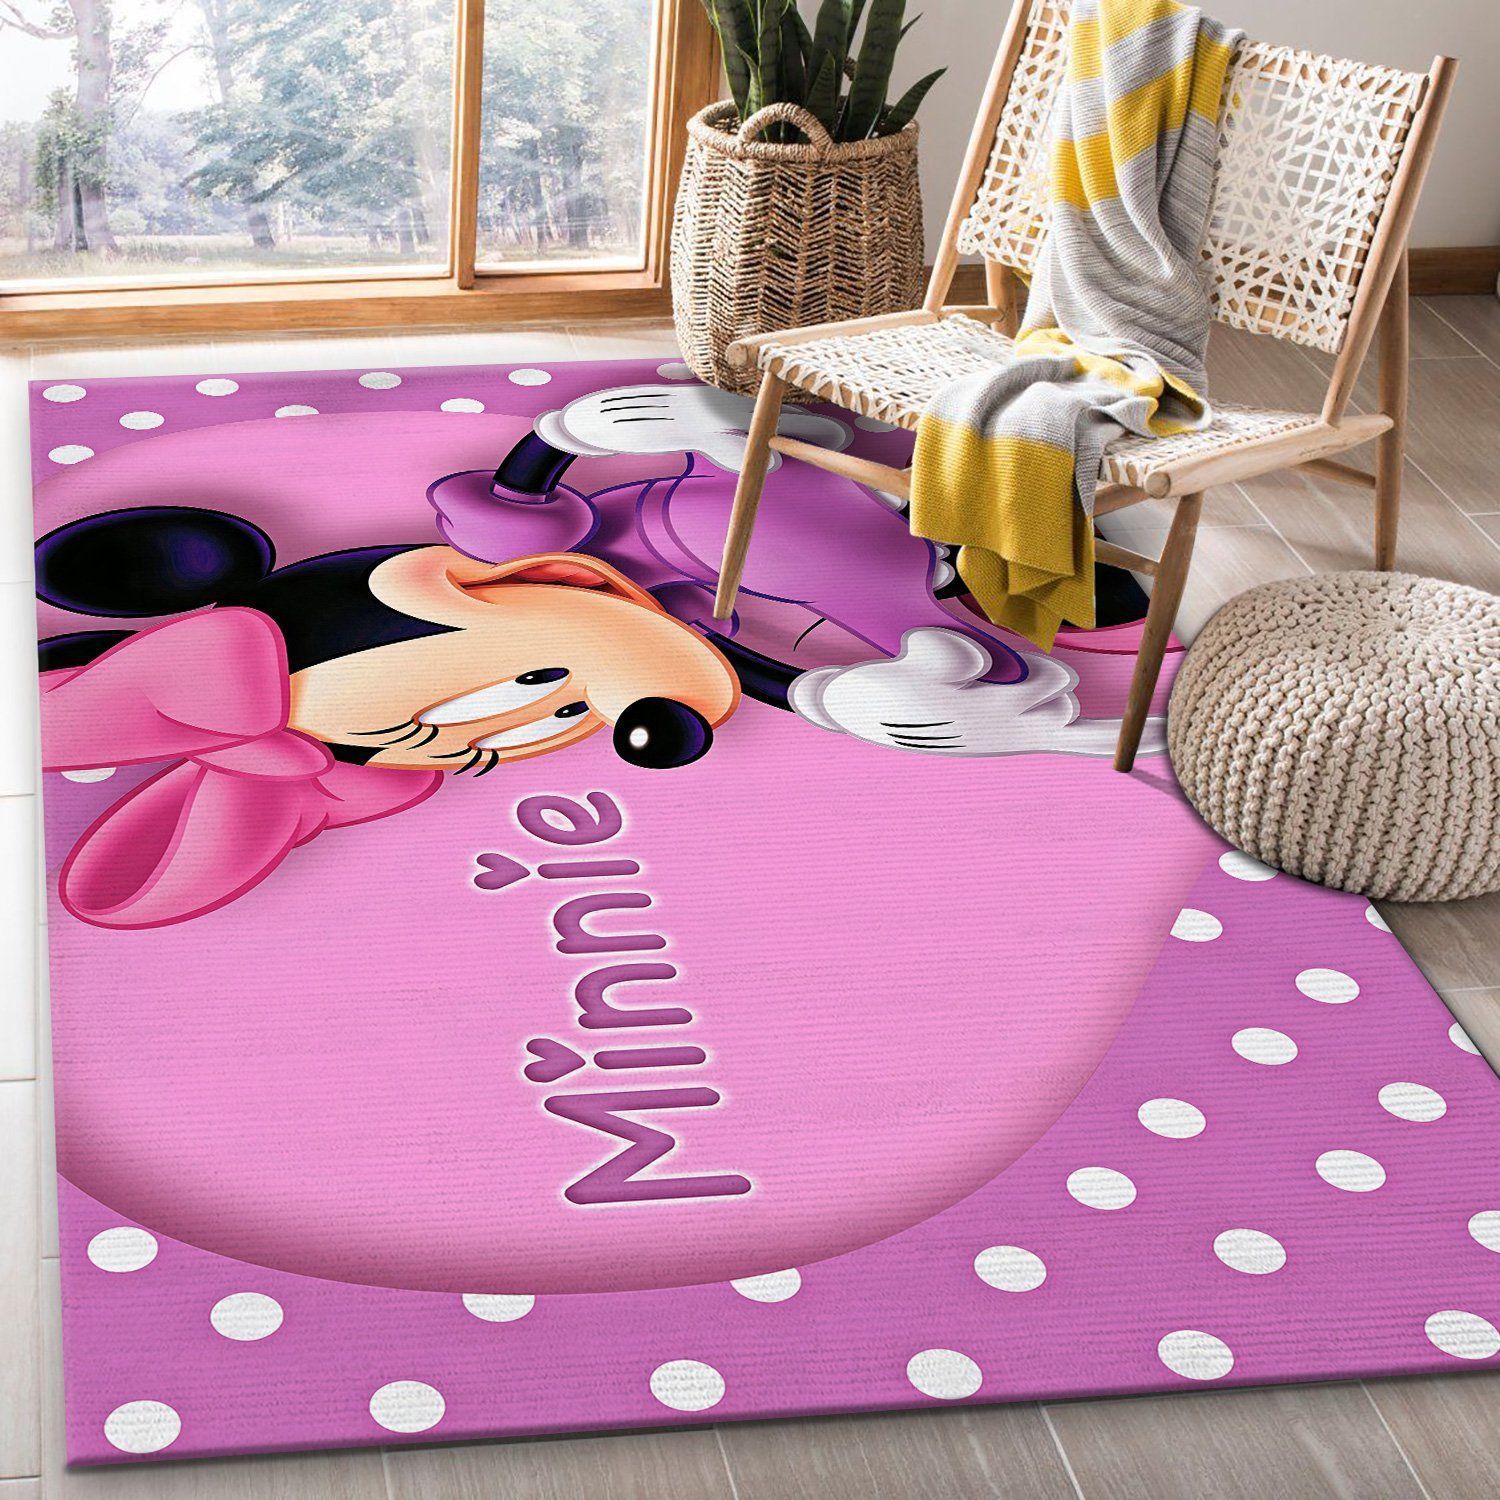 Minnie Mouse Area Rugs Disney Movies Living Room Carpet FN121207 Local Brands Floor Decor The US Decor - Indoor Outdoor Rugs 2